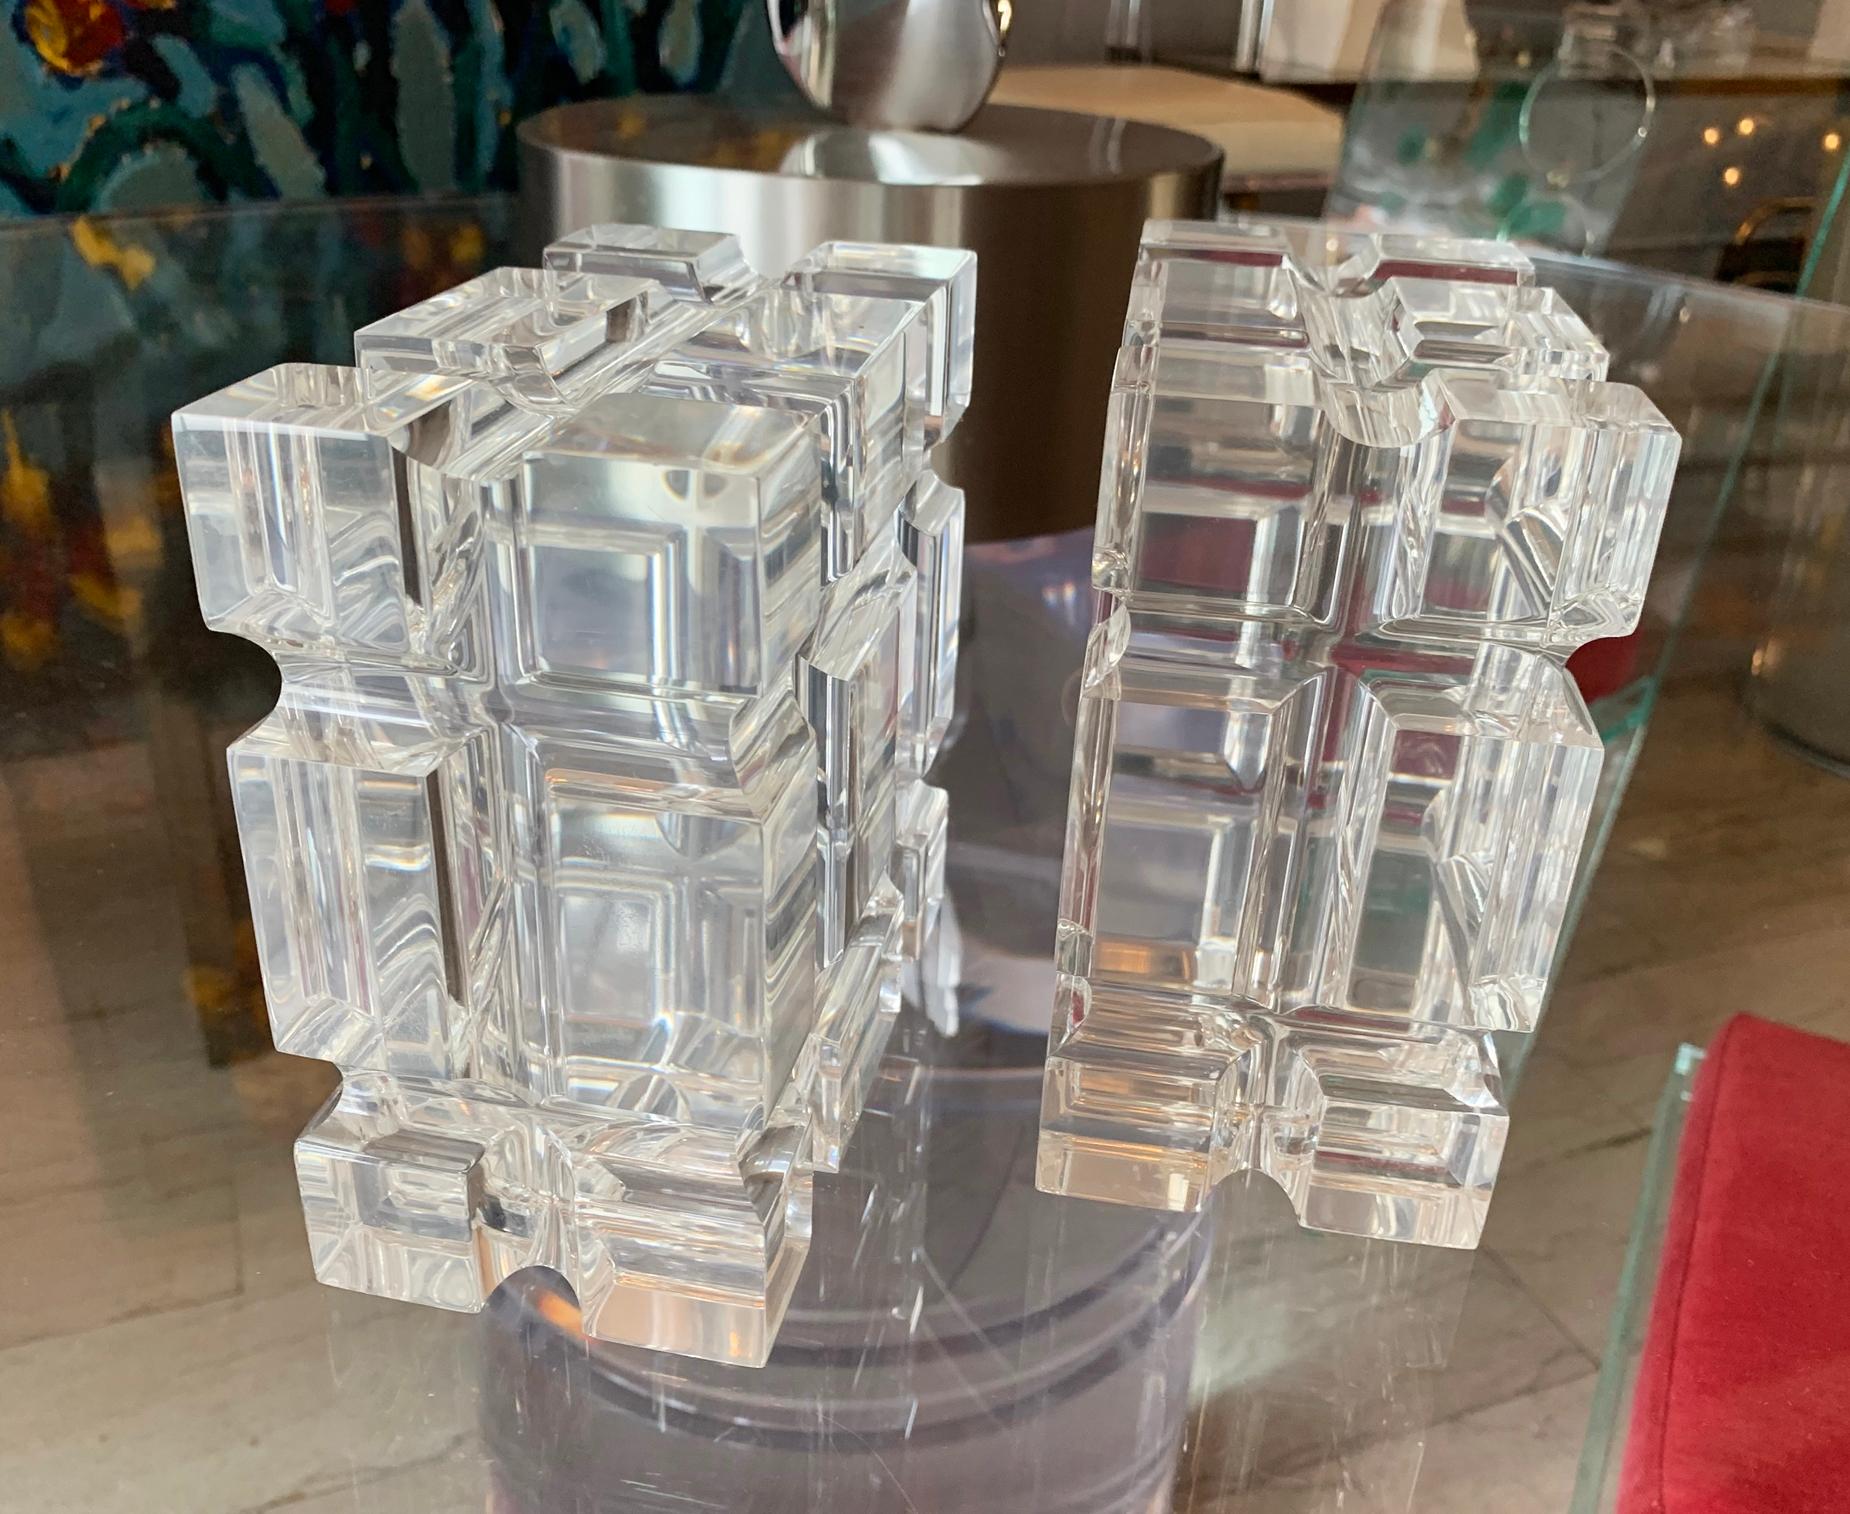 Stunning and beautiful pair of geometric bookends in polished Lucite designed by Amparo Calderon Tapia for Cain modern, the pieces have wonderful shapes and look beautiful against the light, they can be used as bookends or just